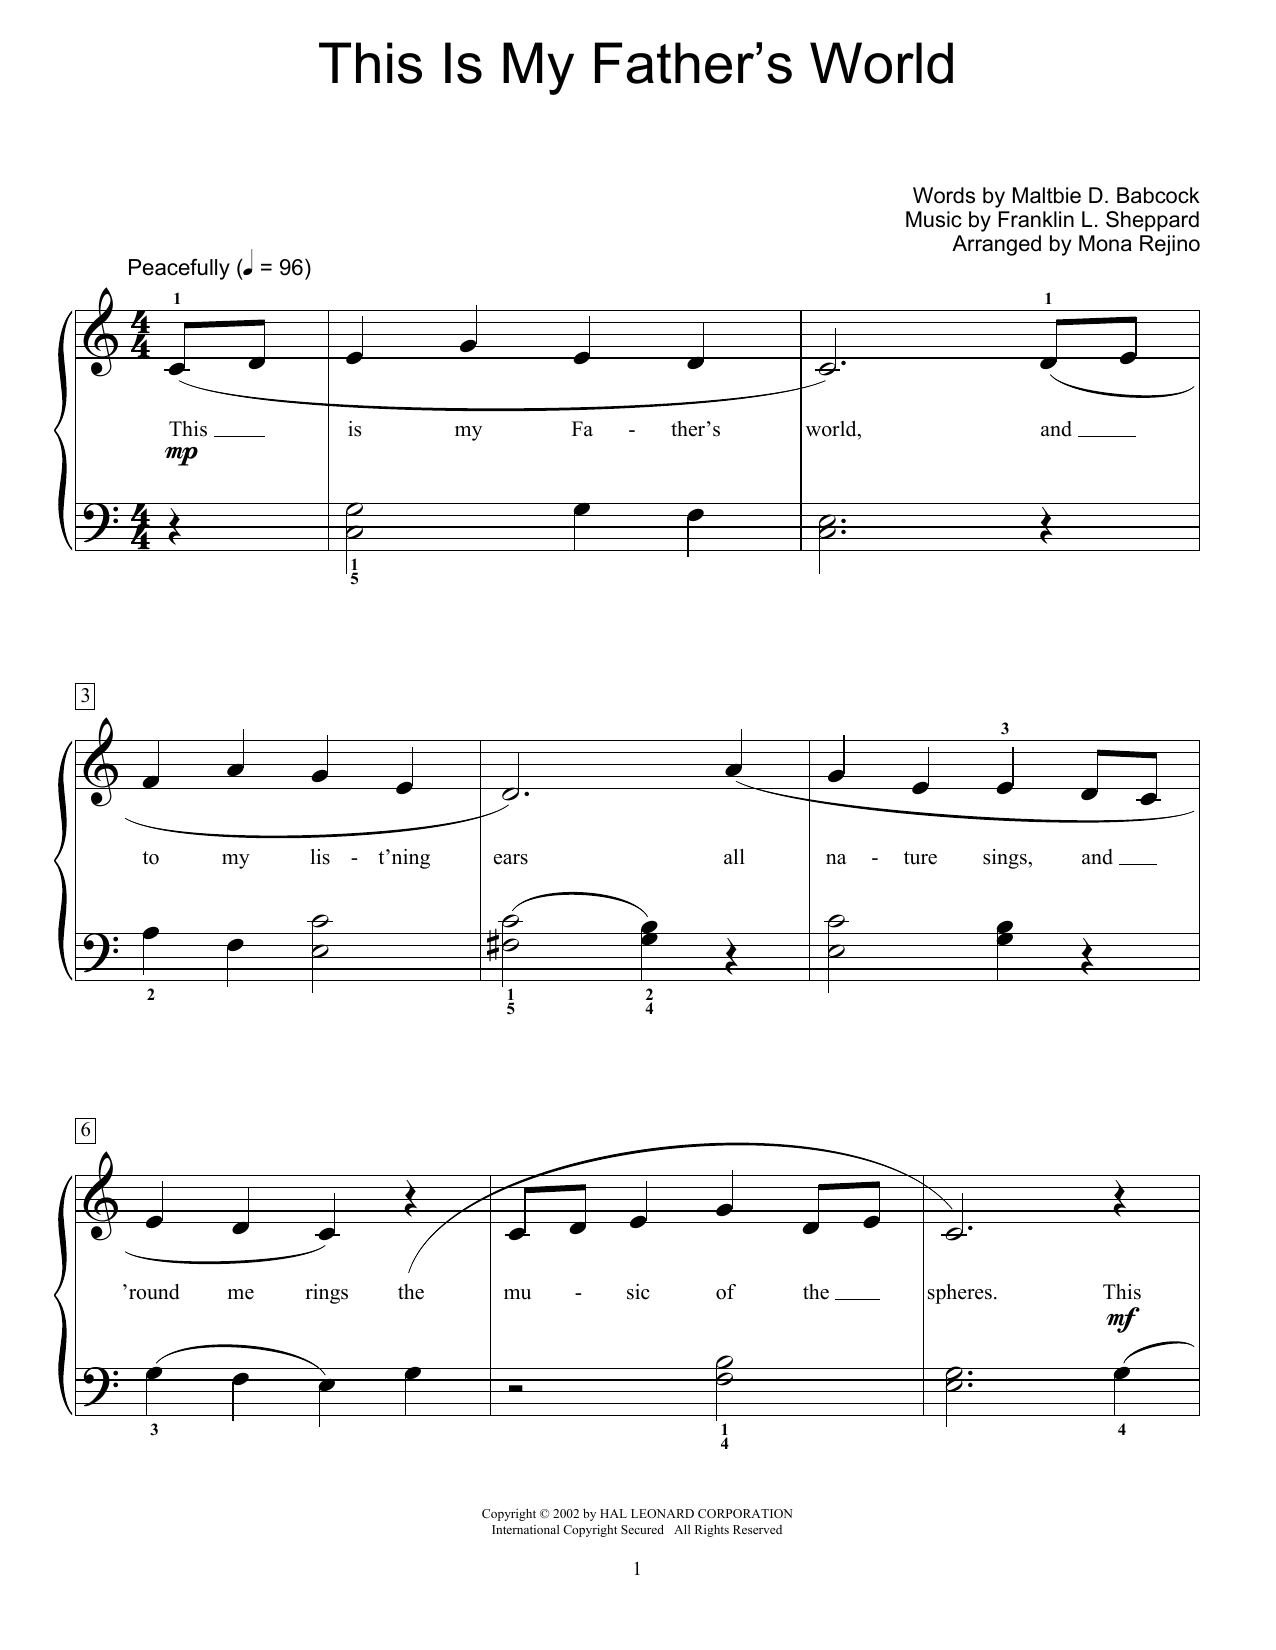 Maltbie D. Babcock This Is My Father's World (arr. Mona Rejino) sheet music notes and chords. Download Printable PDF.